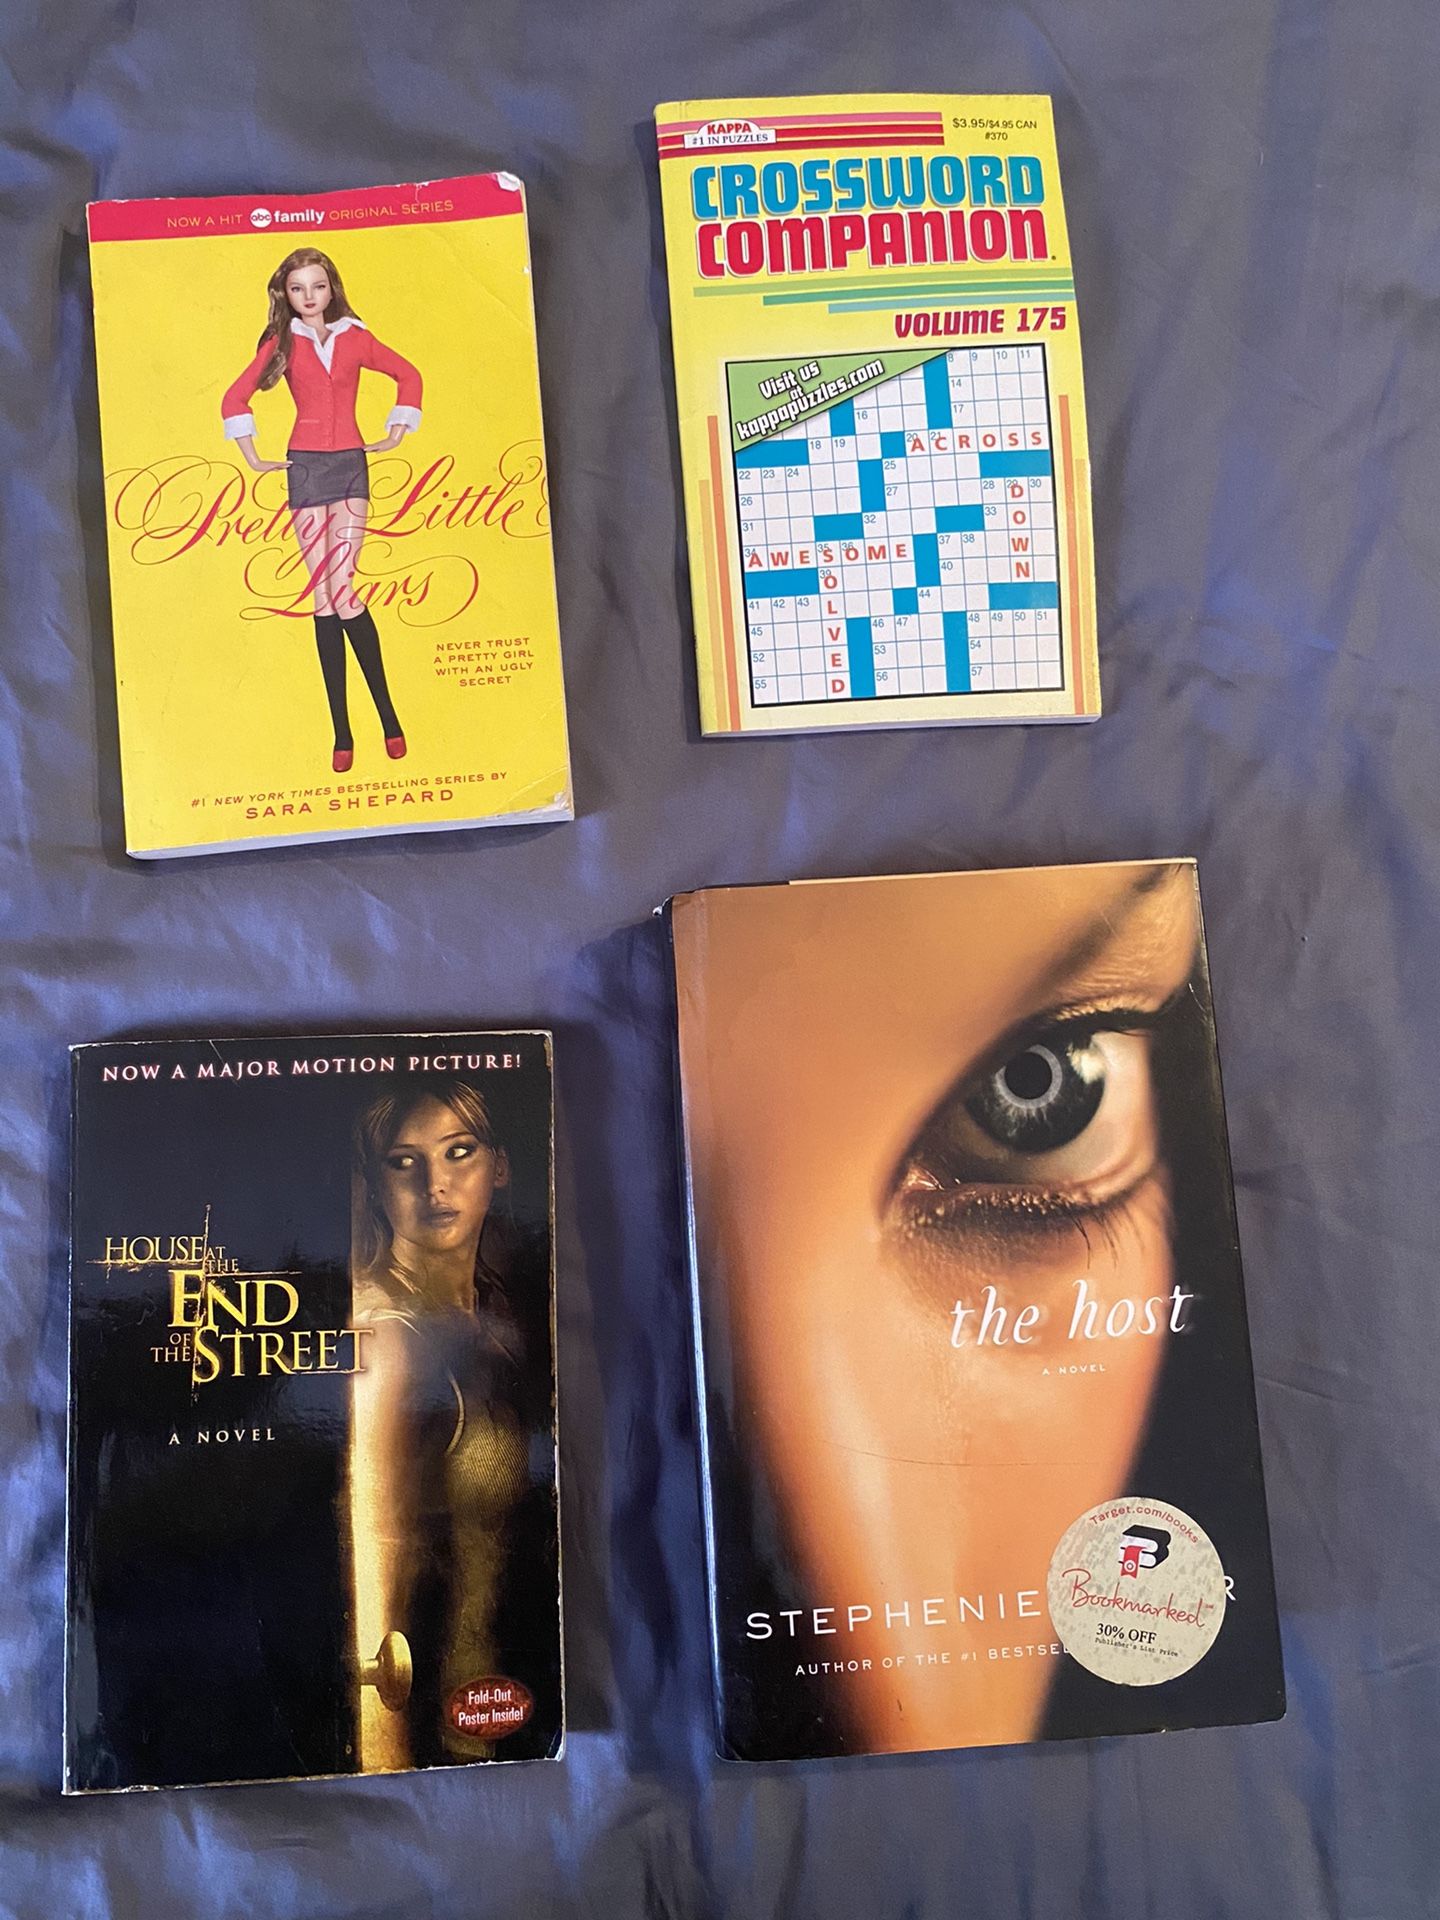 Book lot $2 for all